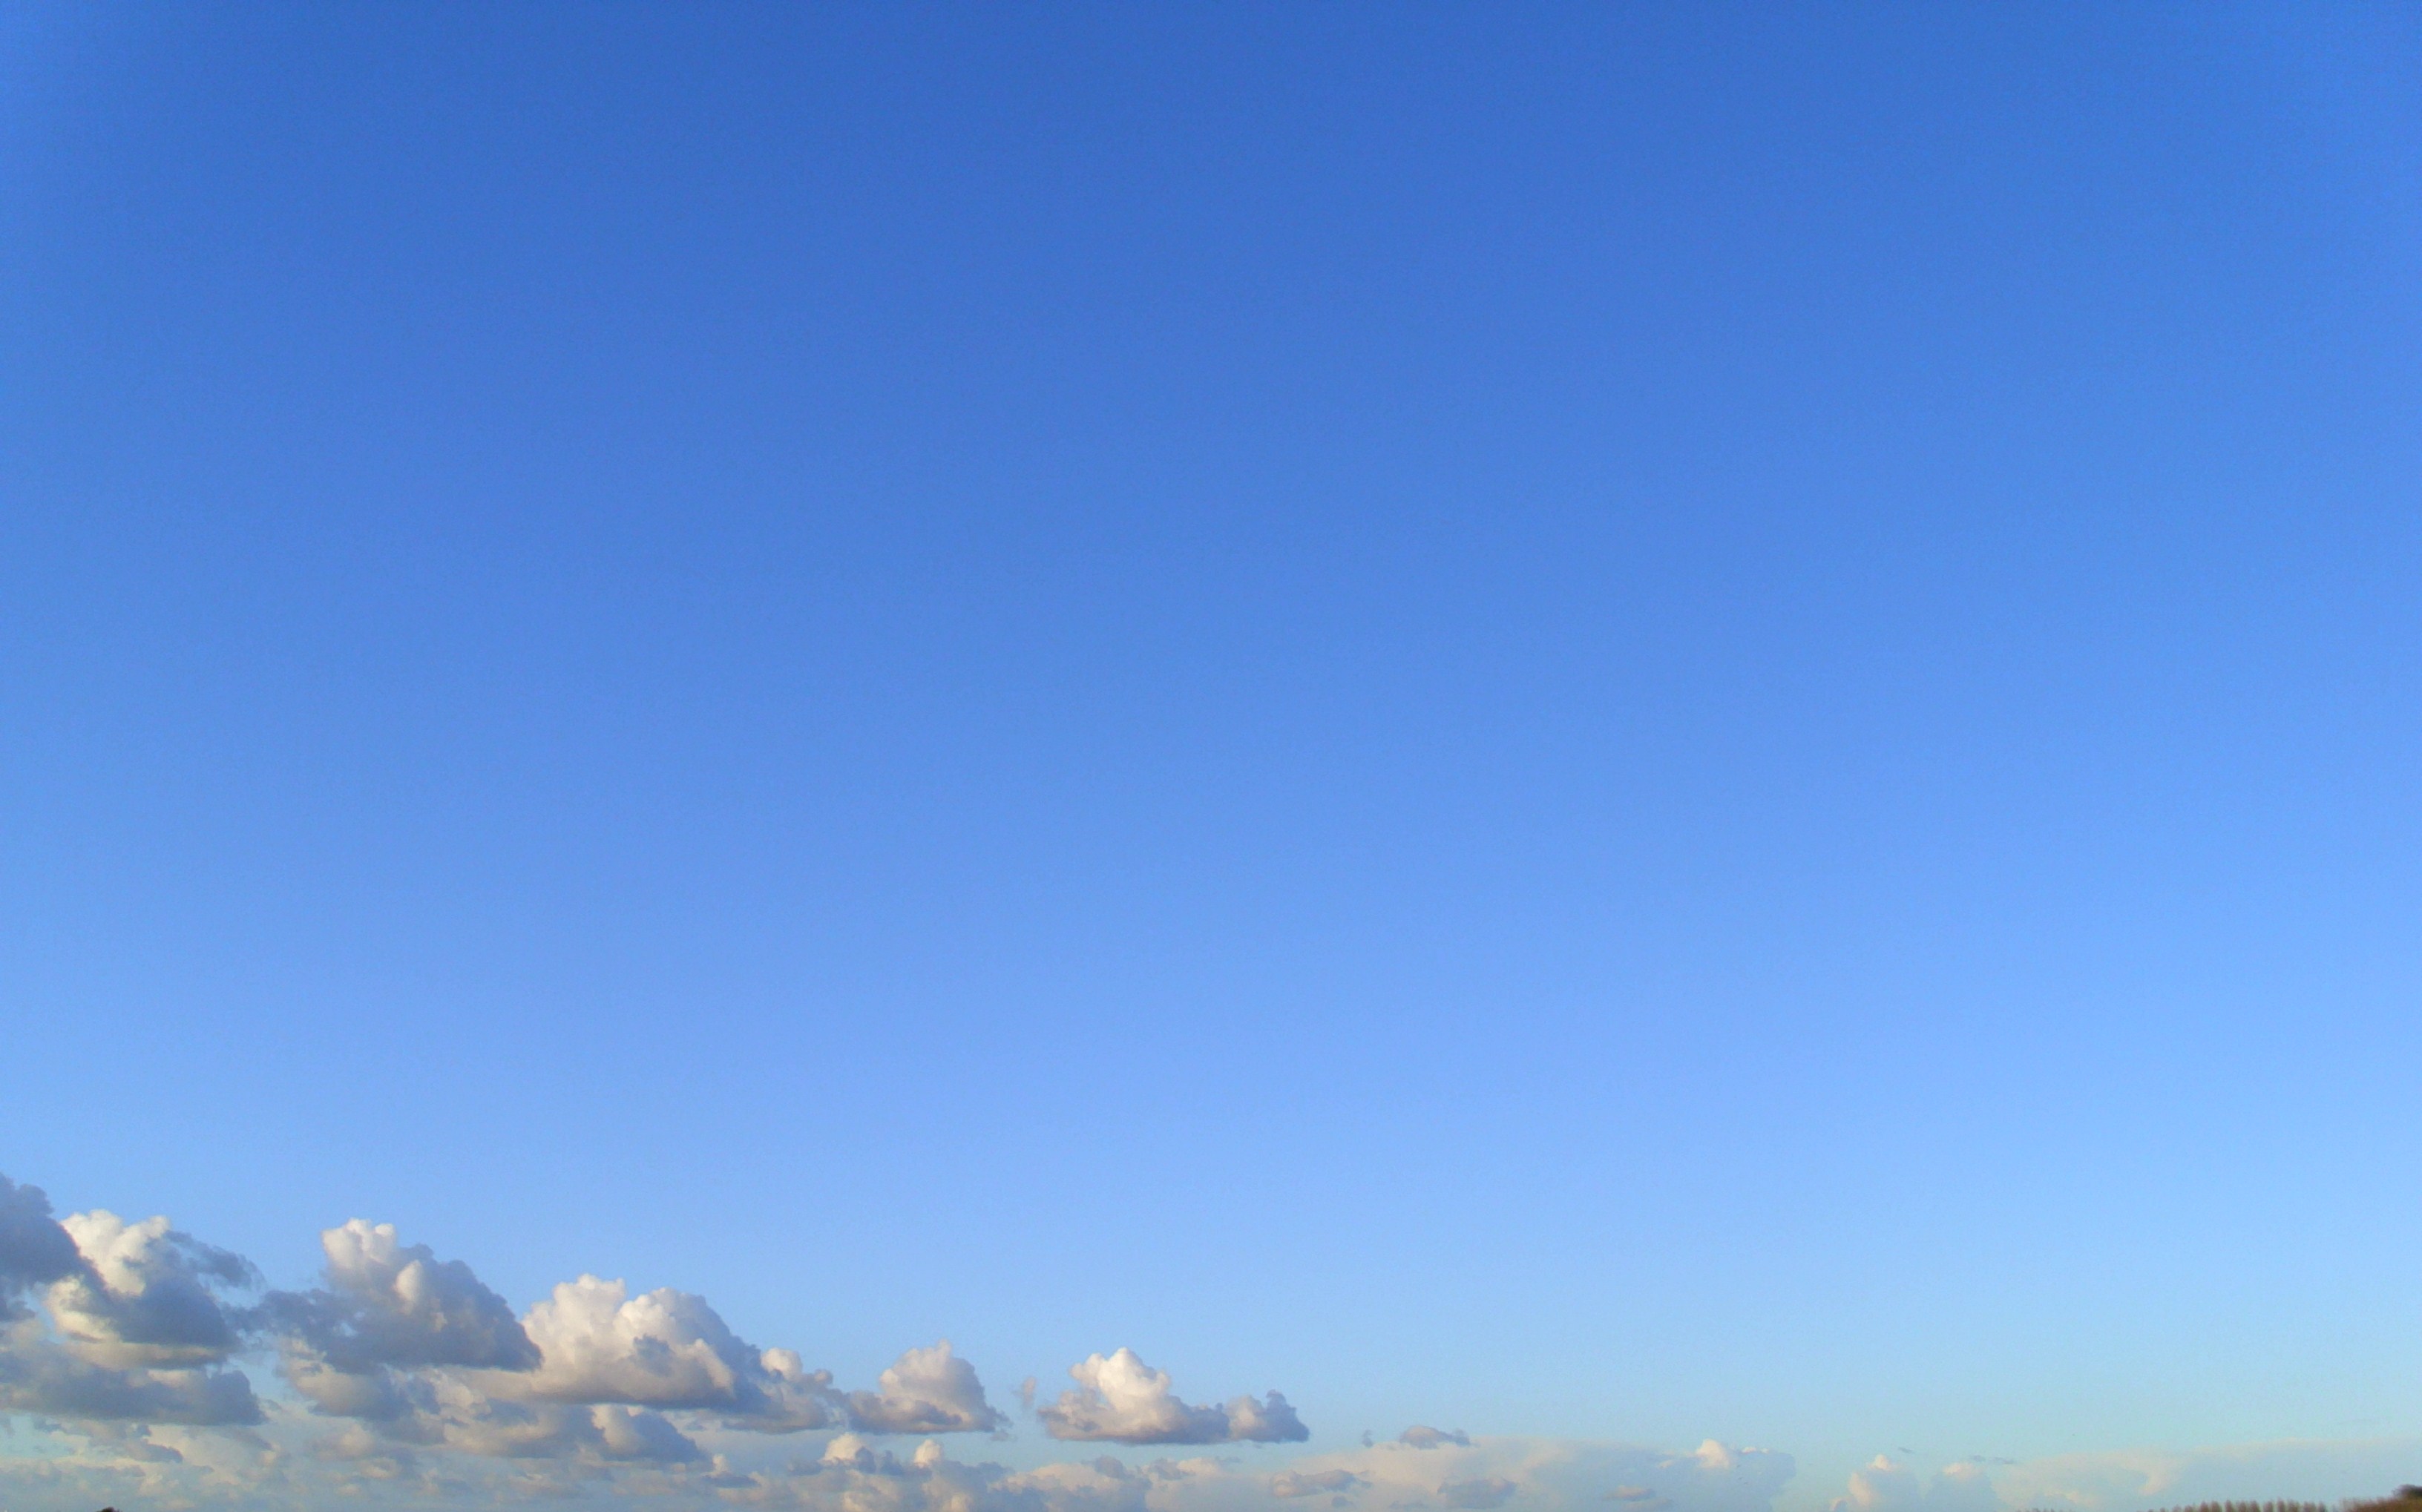 File:Blue sky, white-gray clouds.JPG - Wikimedia Commons